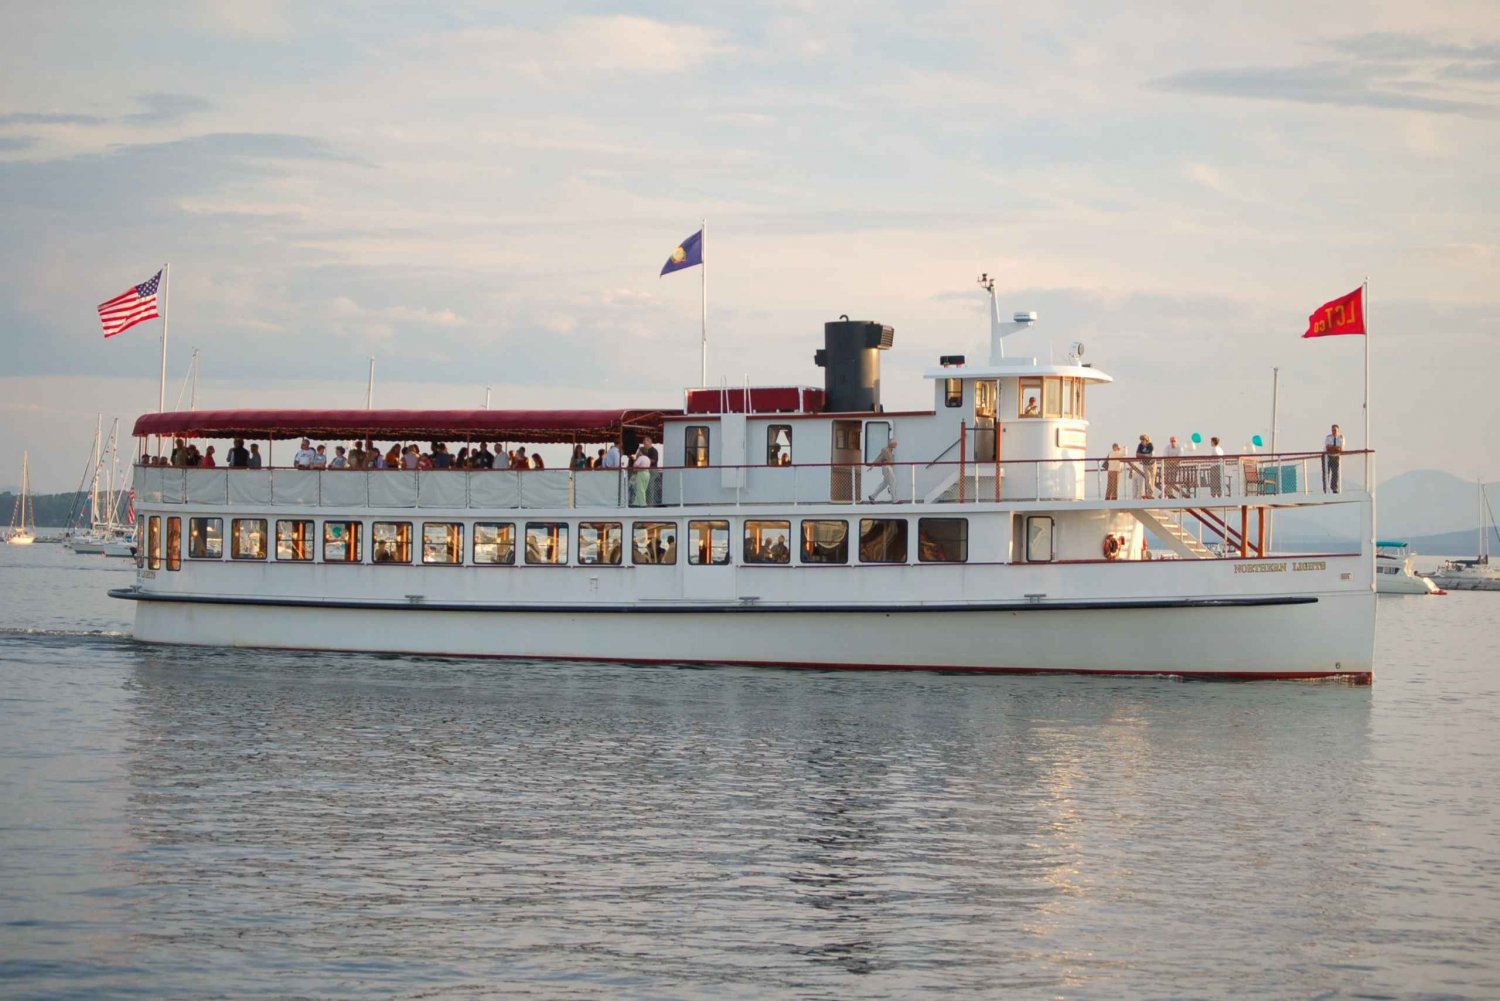 Boston Harbor: Summer Sightseeing Cruise with Barbecue Lunch